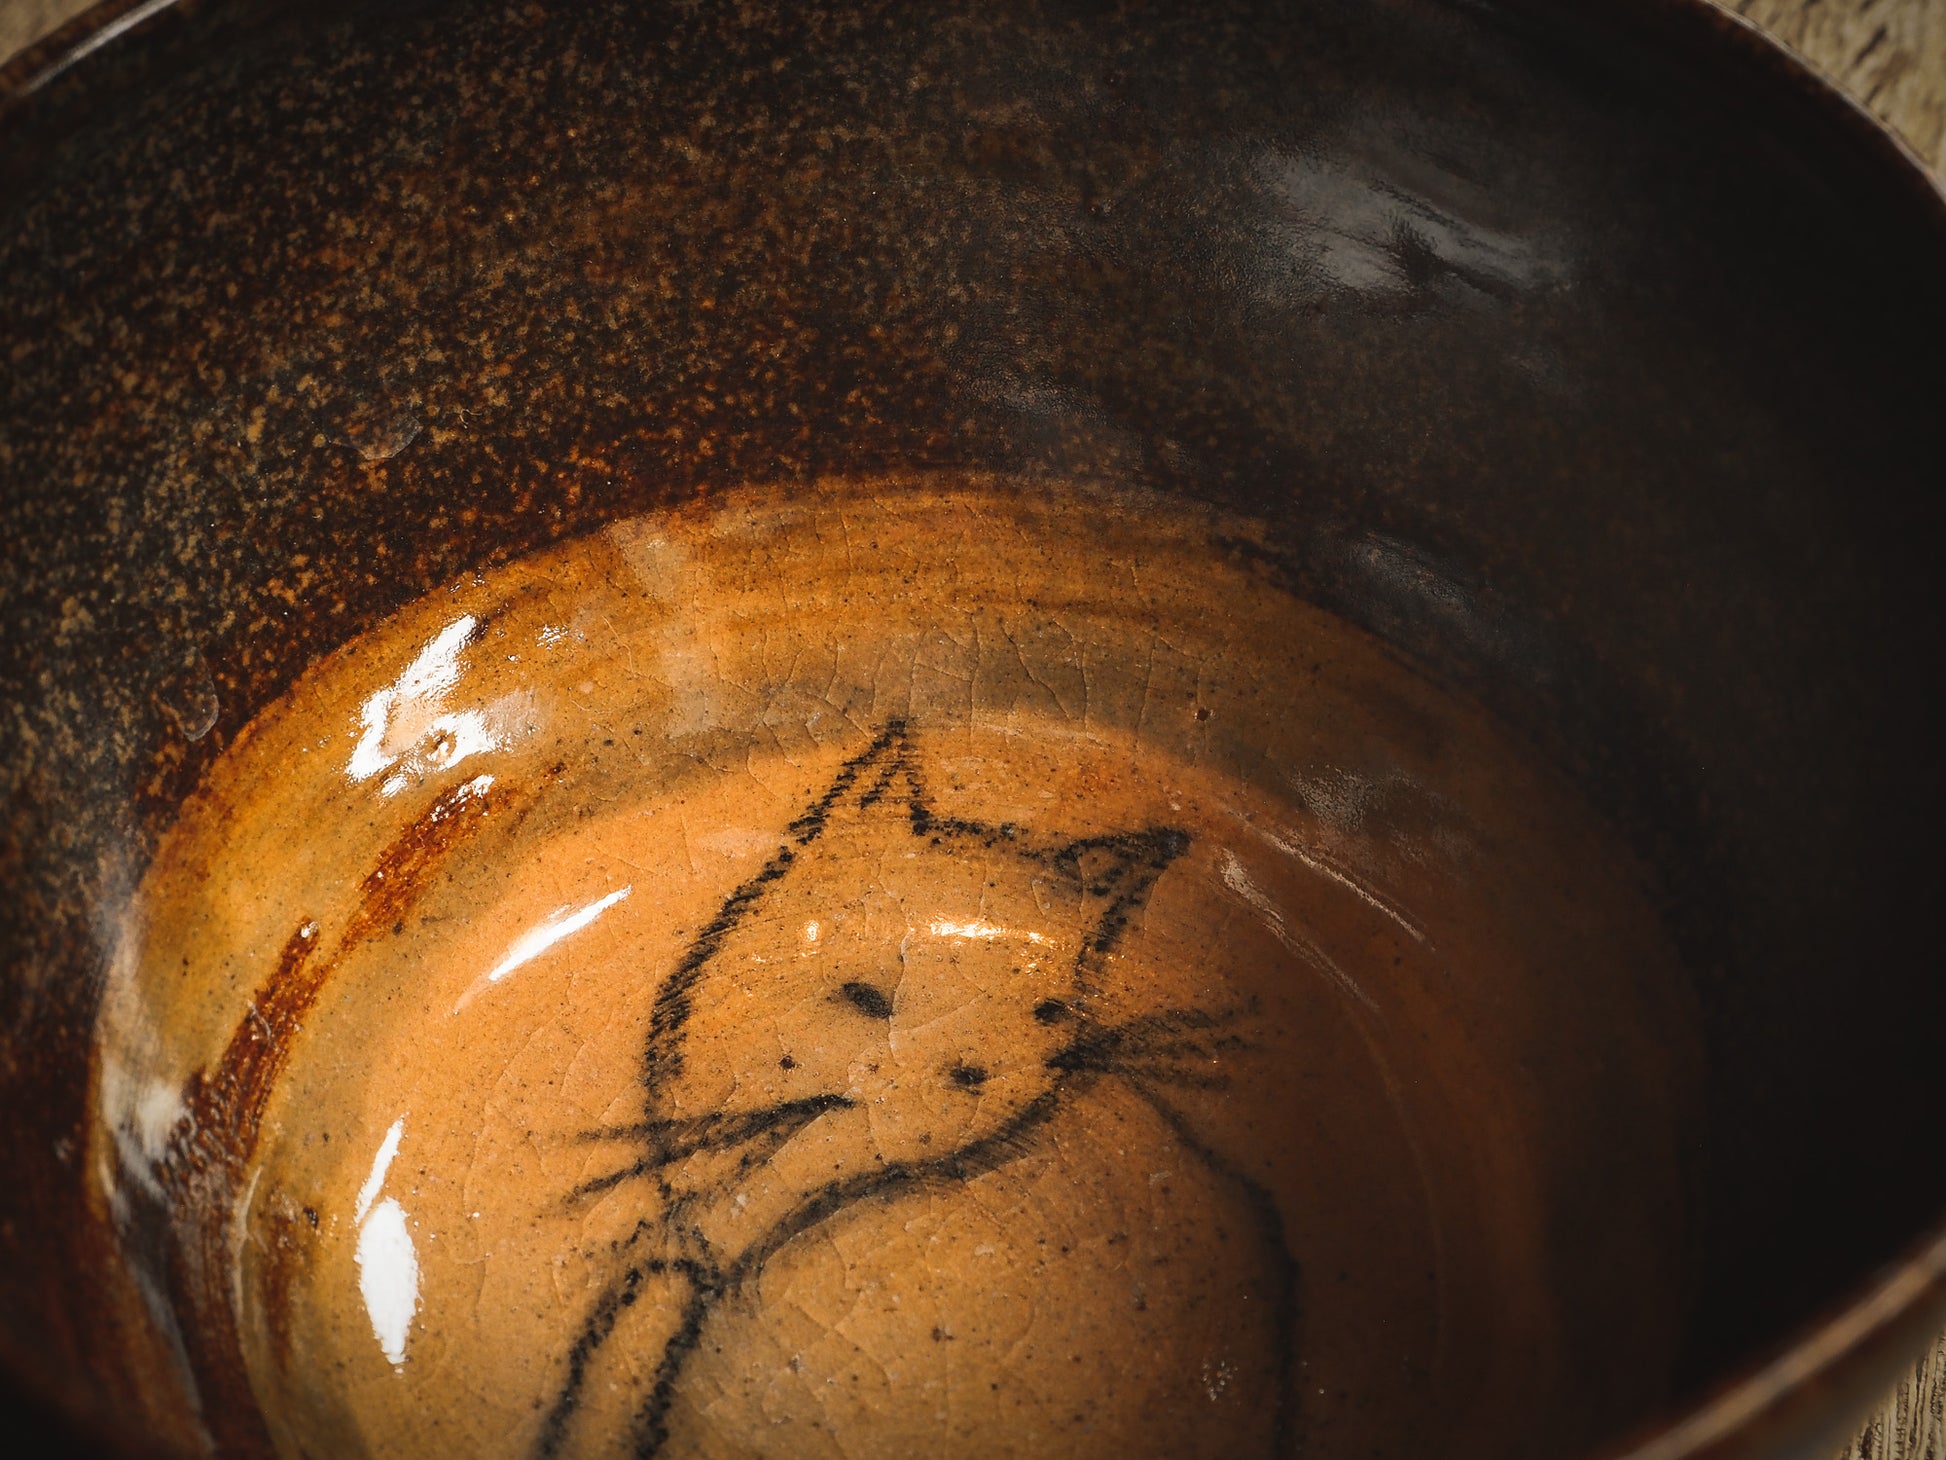 A beautiful cats sits in the bottom of this ceramic mug, adorned with earth tone and blue glazes. An original ceramic coffee and tea mug by Idania Salcido, the artist behind Danita Art. It measures 4 x 4 x 2.5 Inches, totally handmade in my studio. Food and drink safe, hand wash only.